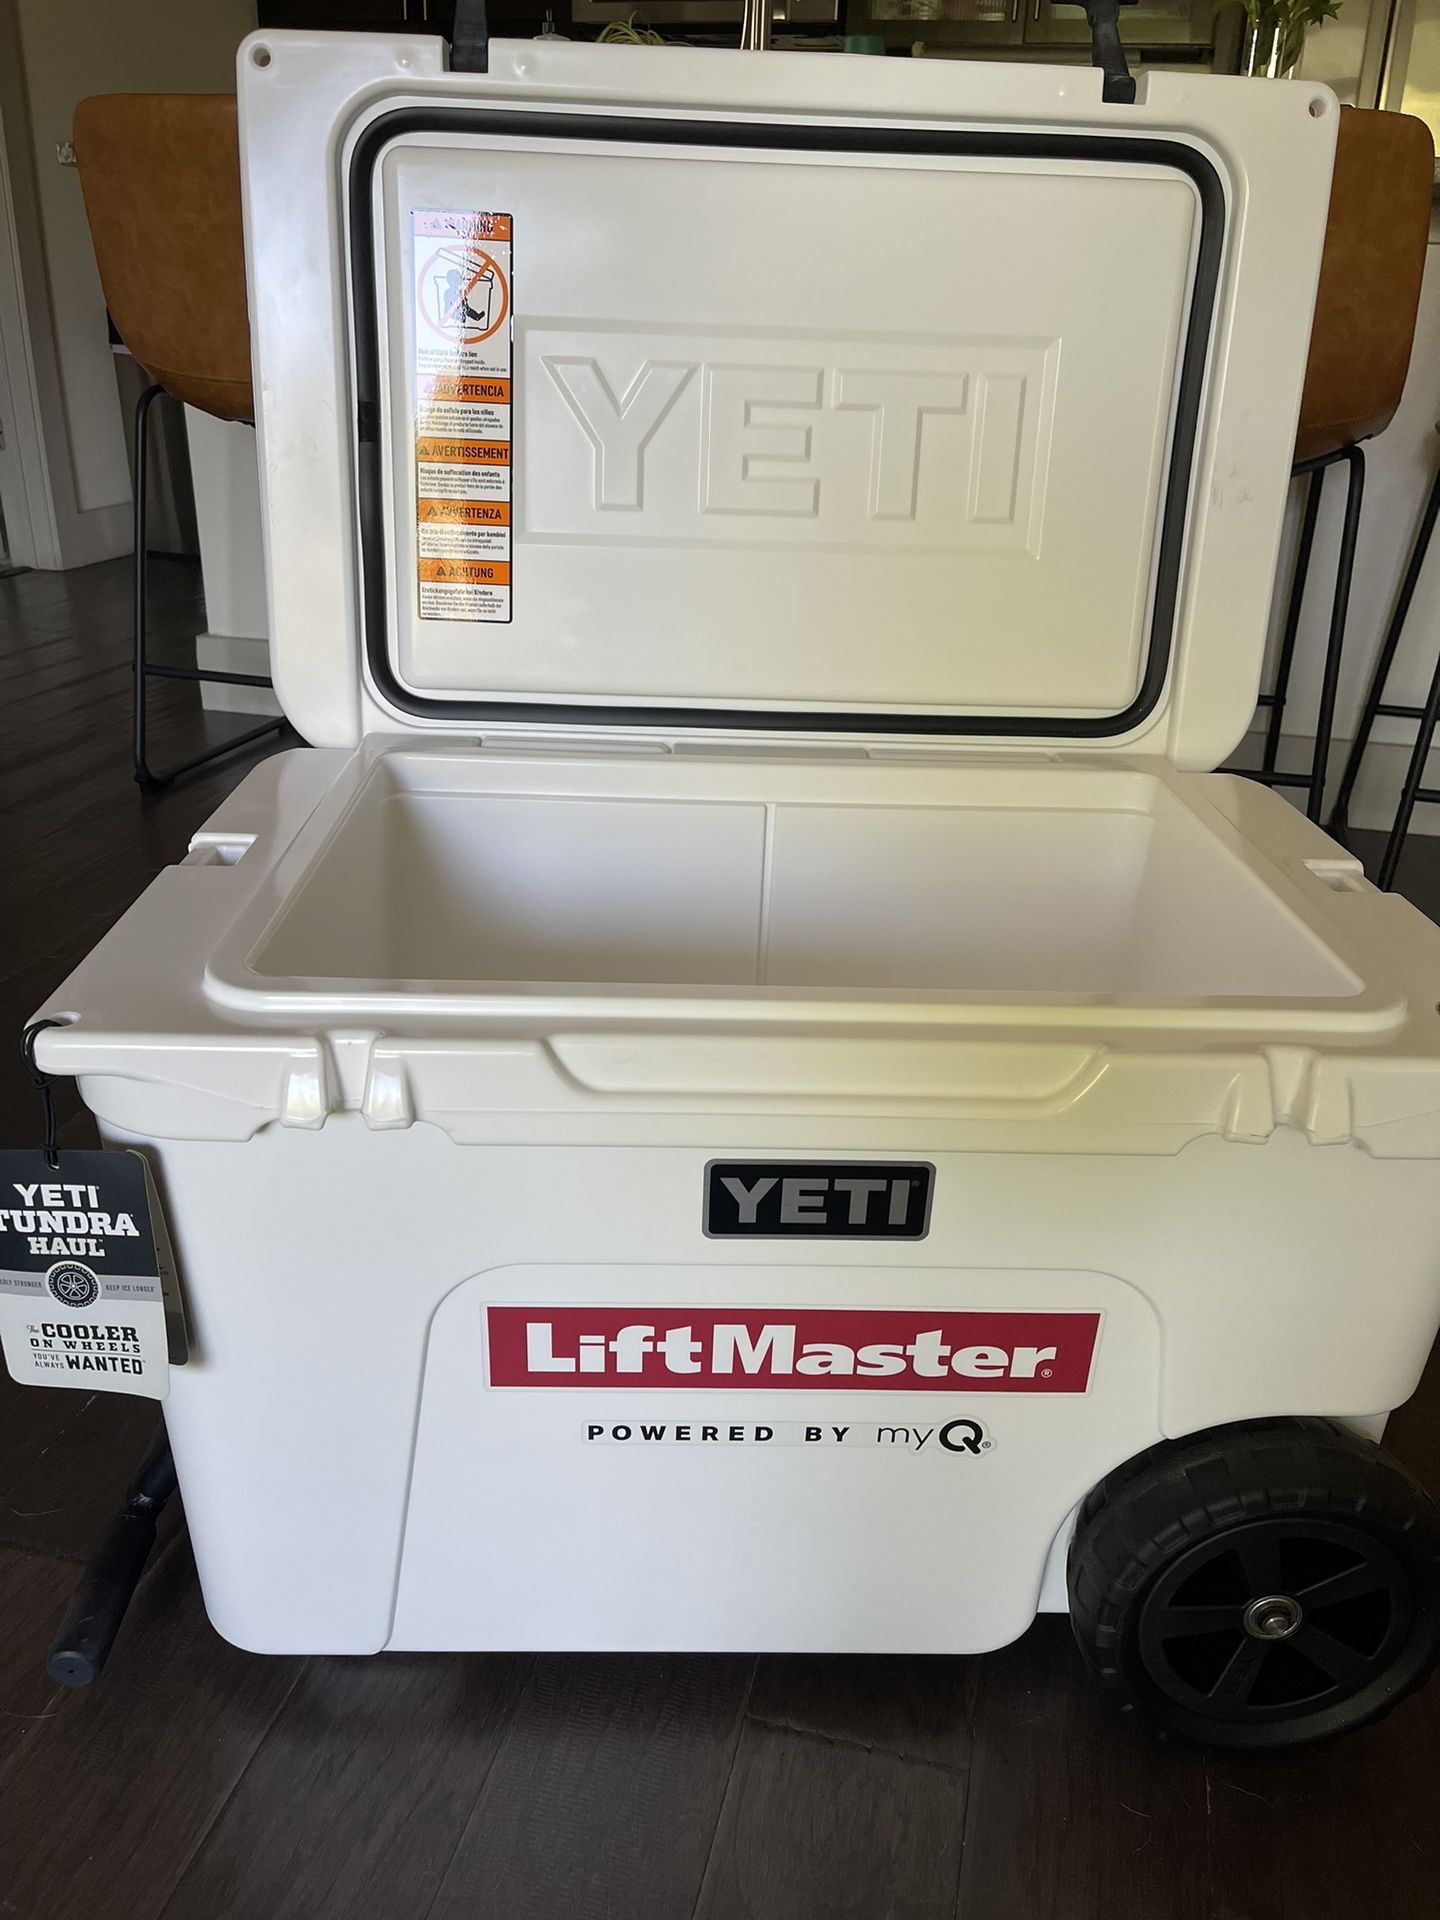 Brand NEW Yeti Tundra Cooler For Sale!!!